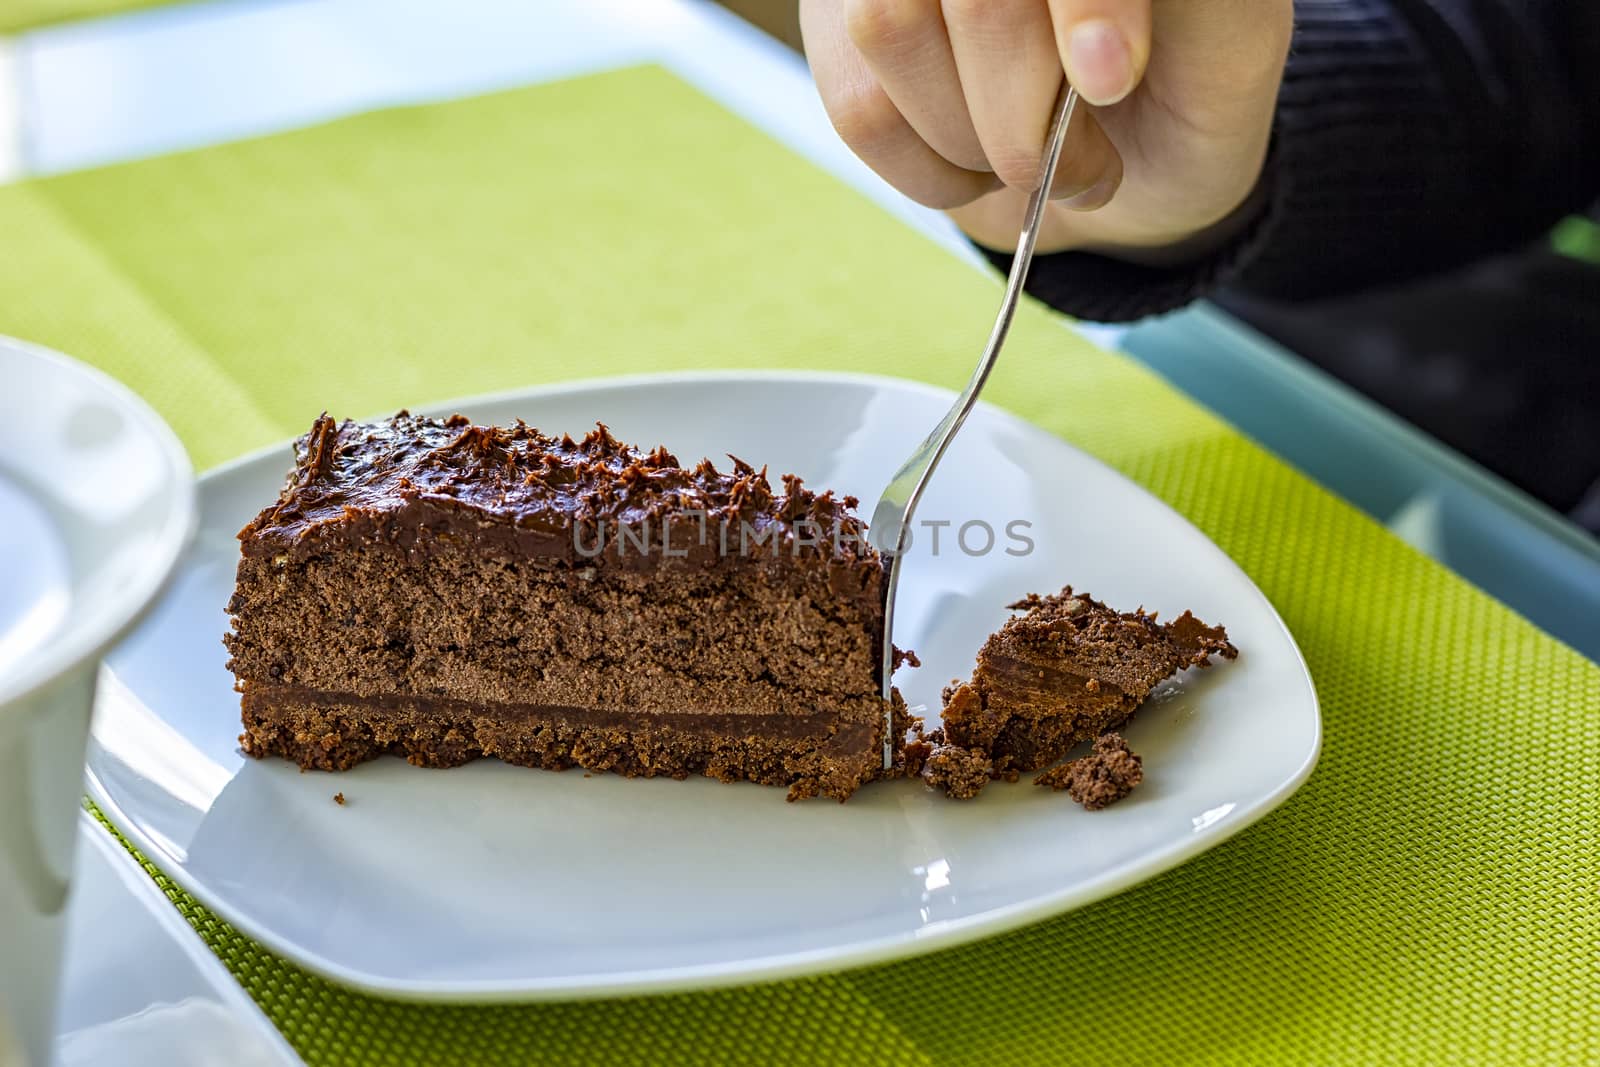 A girl's hand breaks a piece of chocolate cake on a plate. Close Up